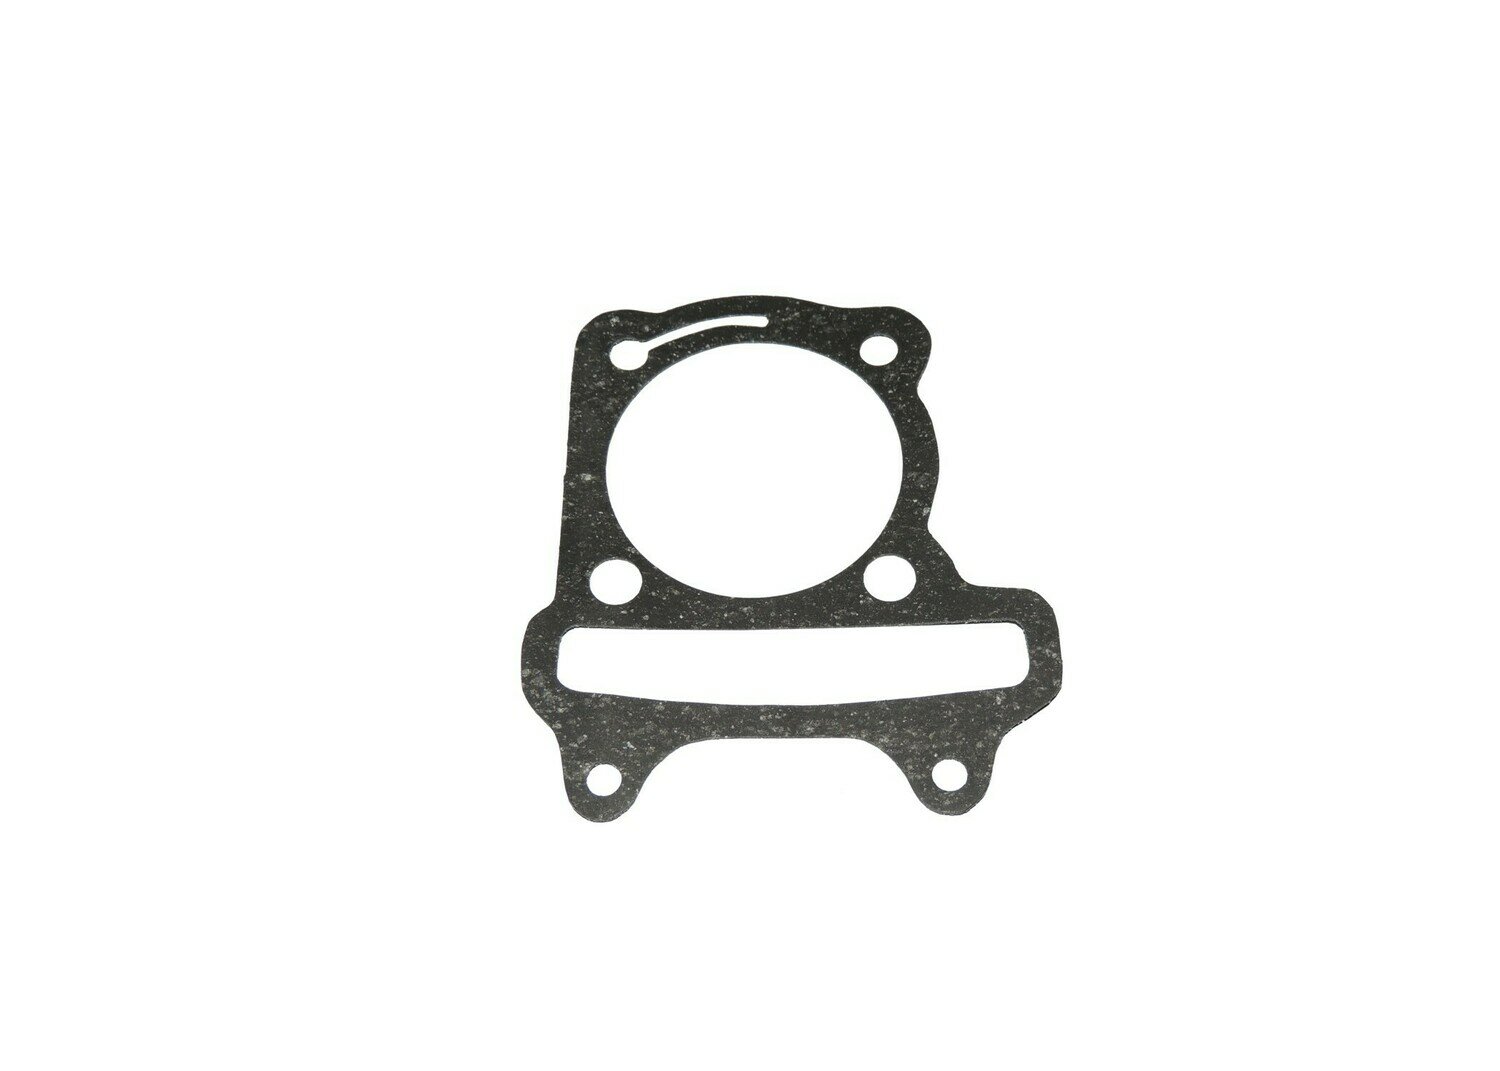 BASE GASKET GY6 58.5MM C'A SEE (Arrive 8316)